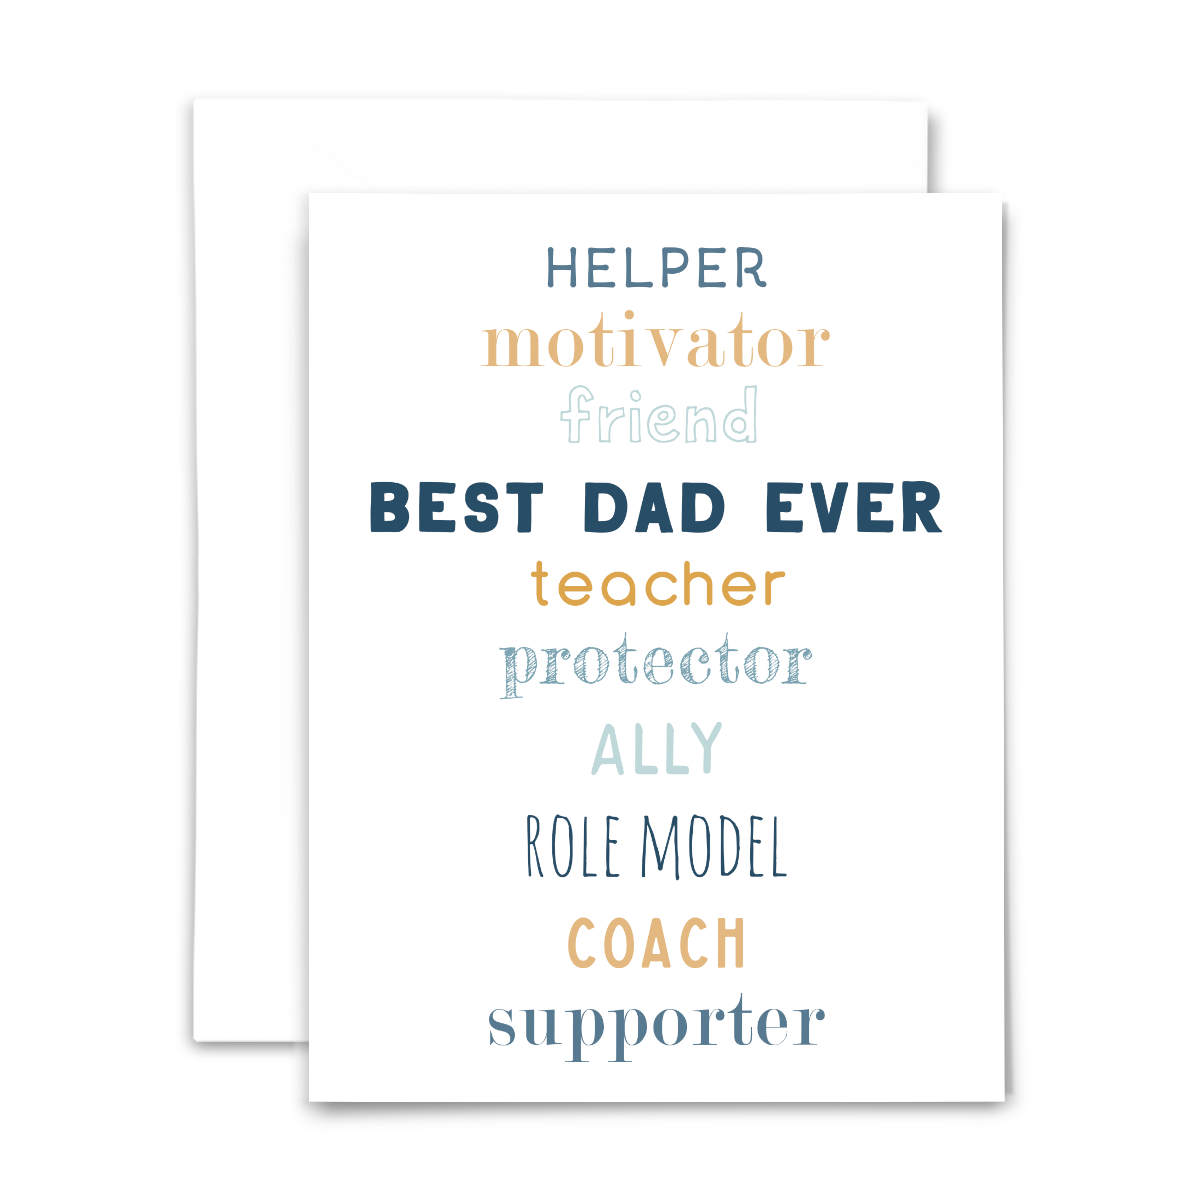 Best dad ever greeting card with blank interior; all the roles dad plays (helper, friend, protector, coach, etc) spelled out in blue and gold fonts on white background; with white envelope